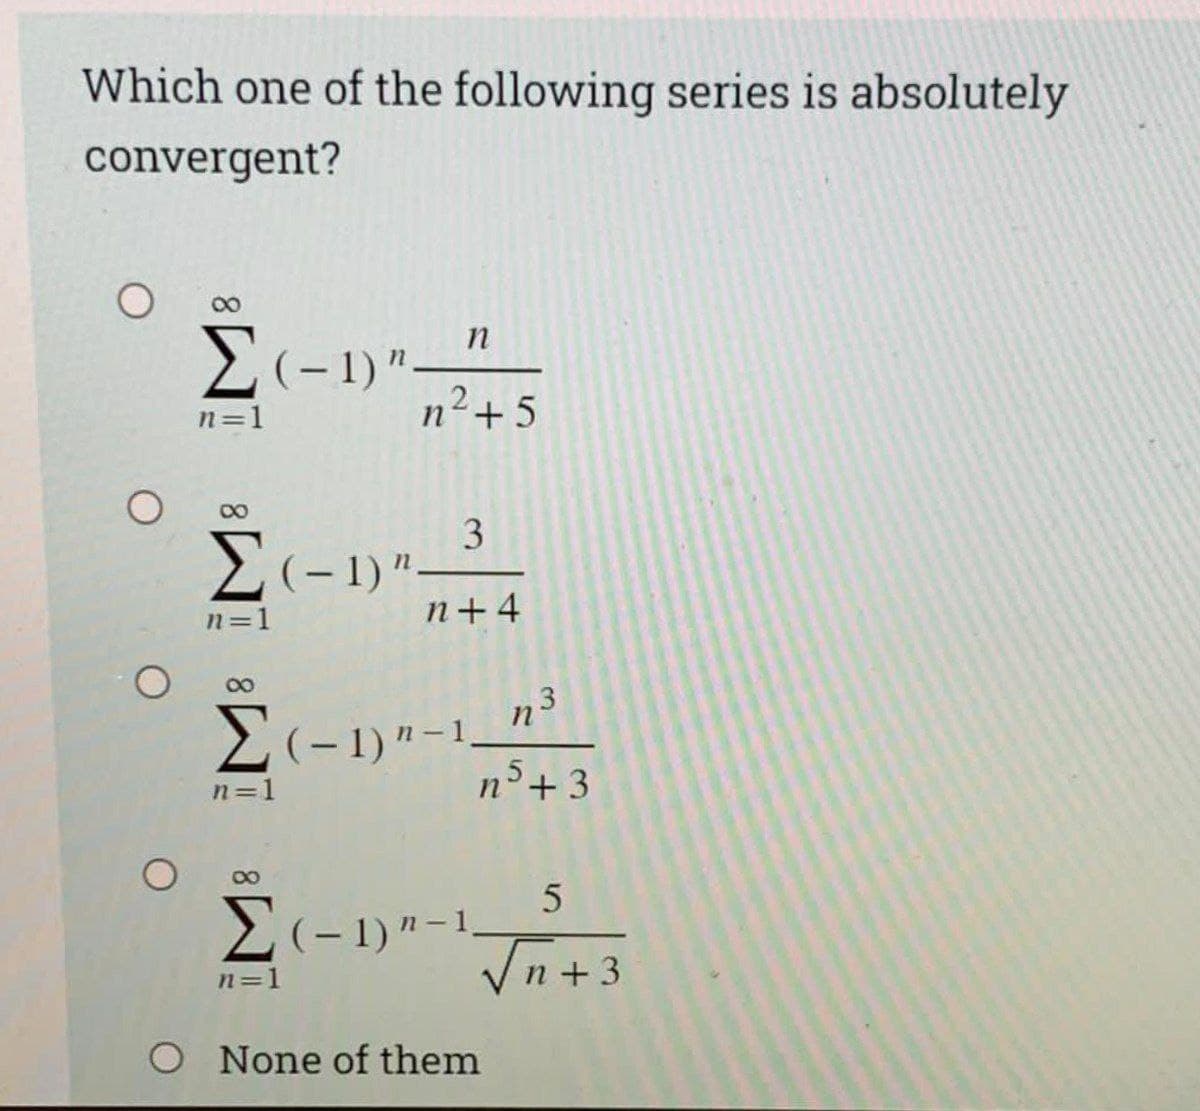 Which one of the following series is absolutely
convergent?
00
n
E(-1)"
n2-
n=1
+5
2(-1)"-
n+ 4
n=1
2(-1)"-1
,5
n=1
n°+3
Vn+3
n=1
O None of them
3.
